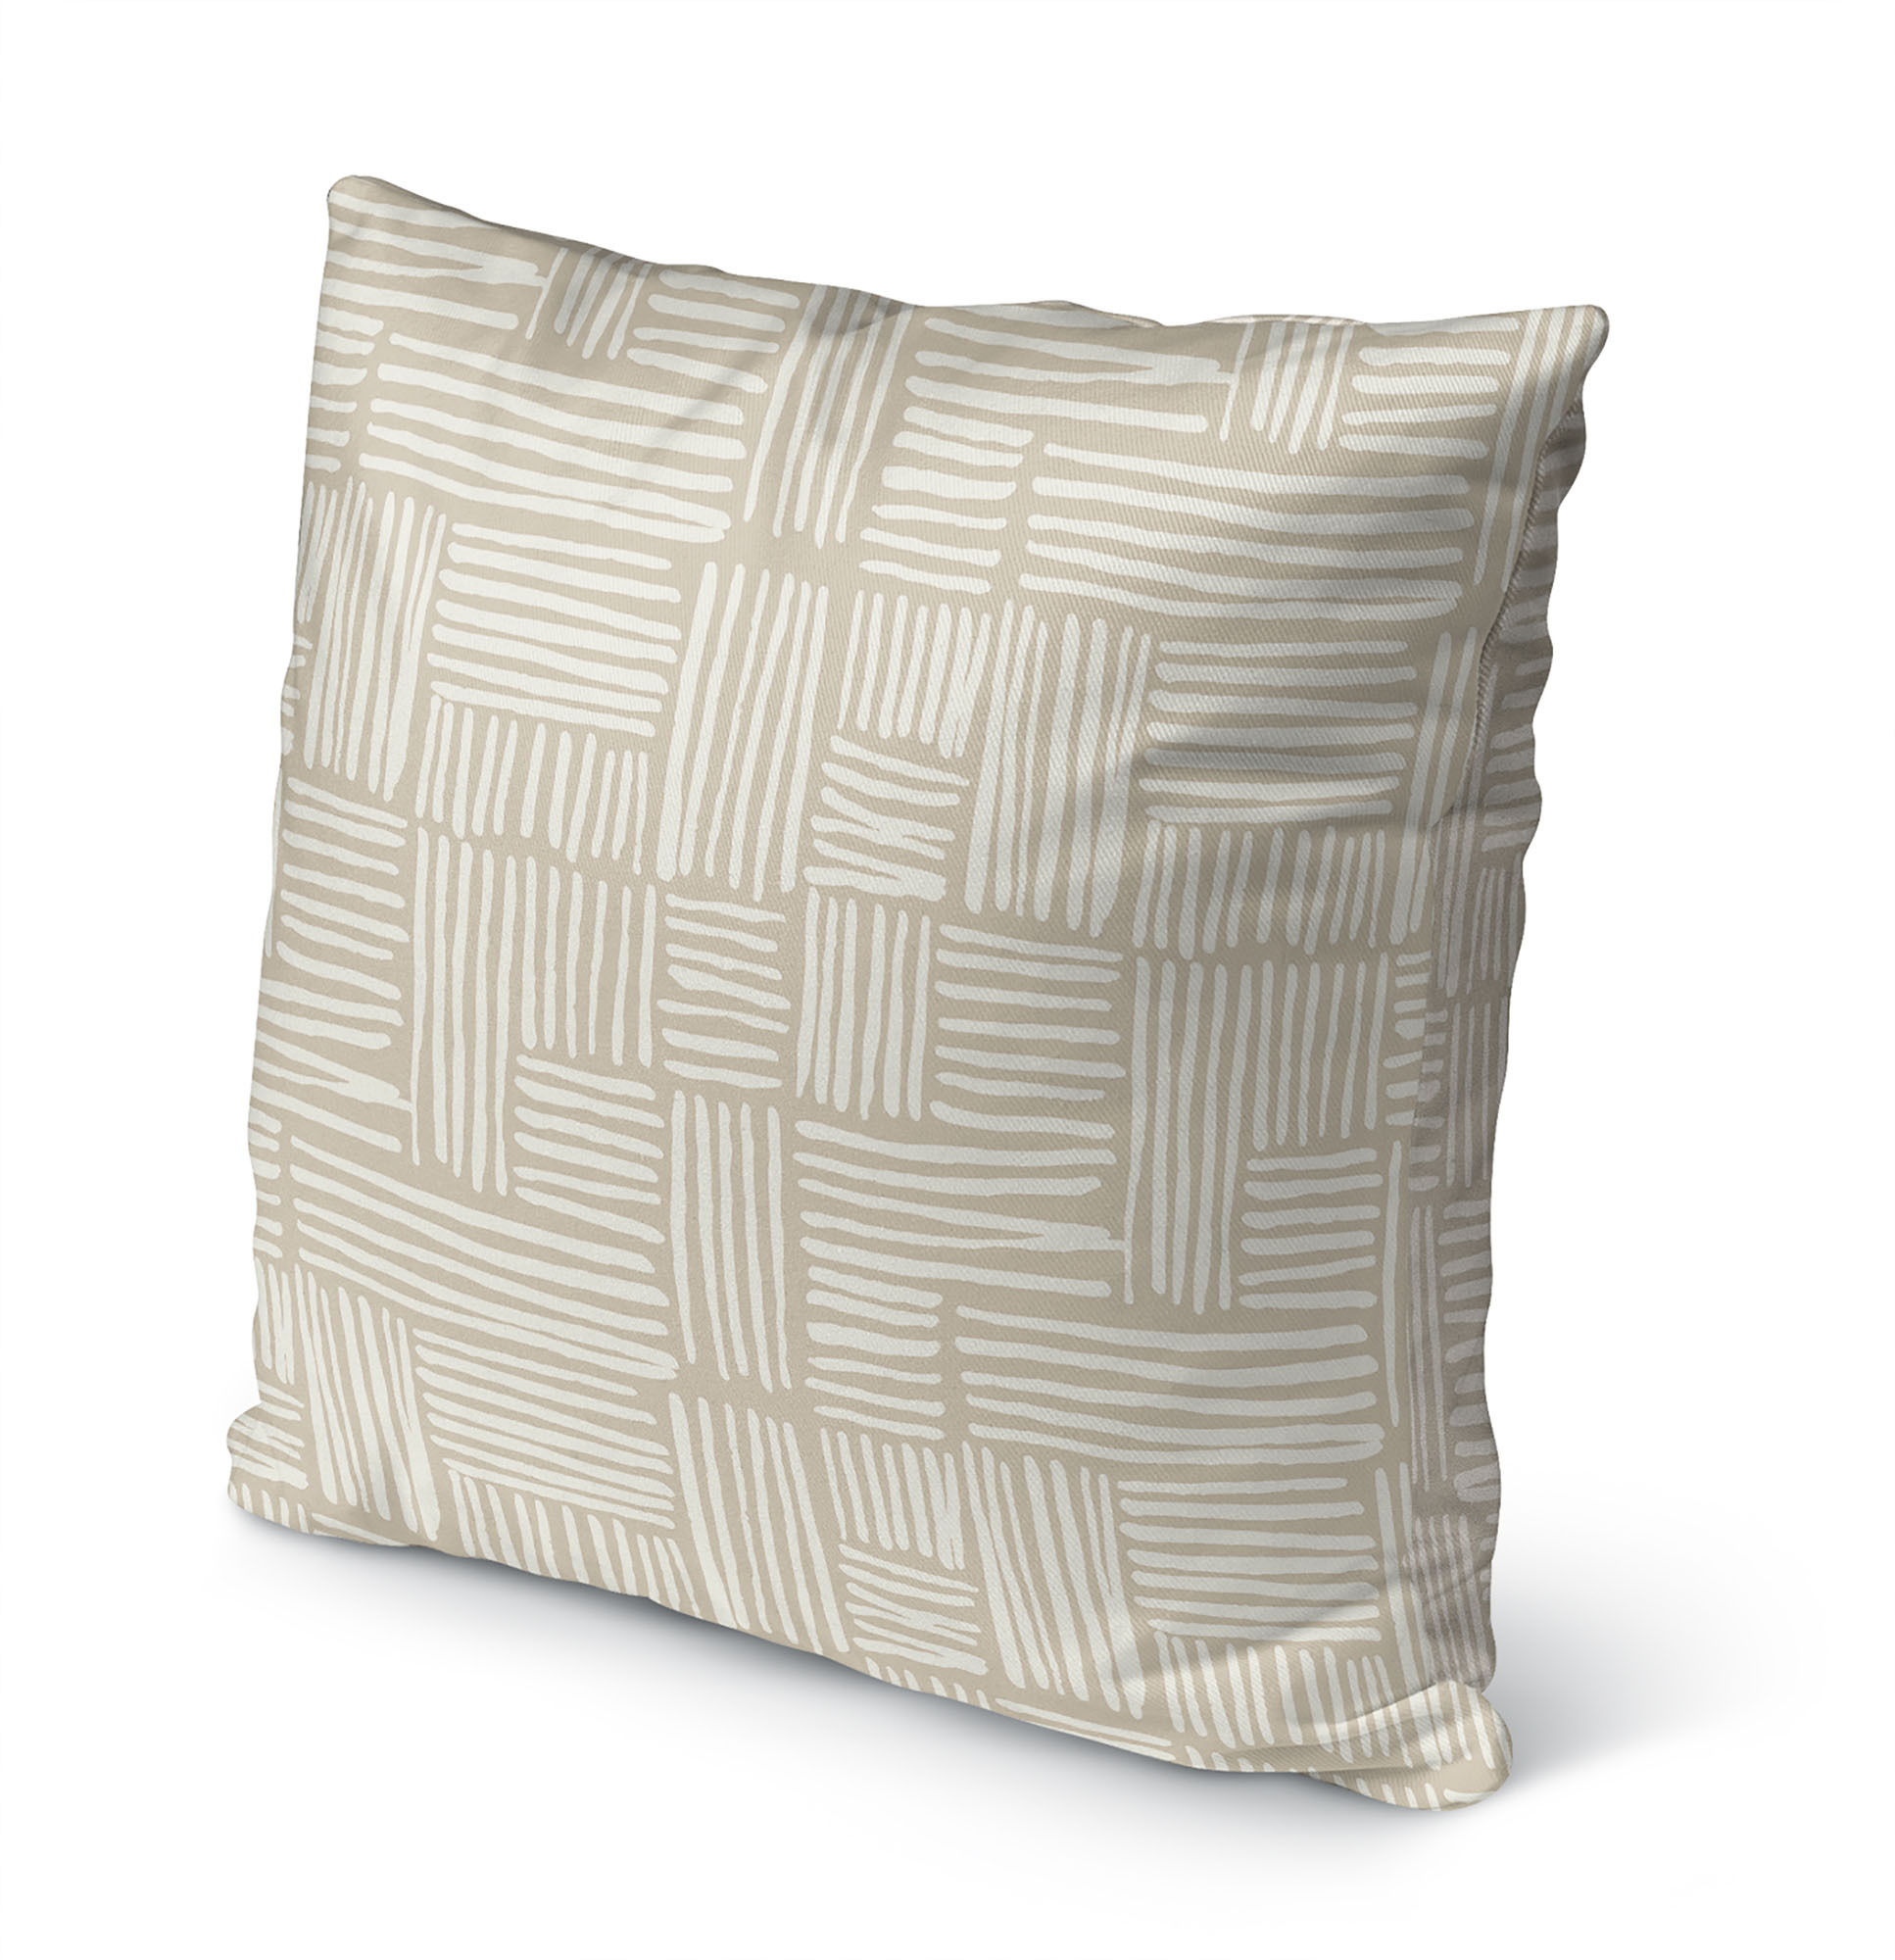 Rails Beige Outdoor Pillow by Kavka Designs - image 3 of 5